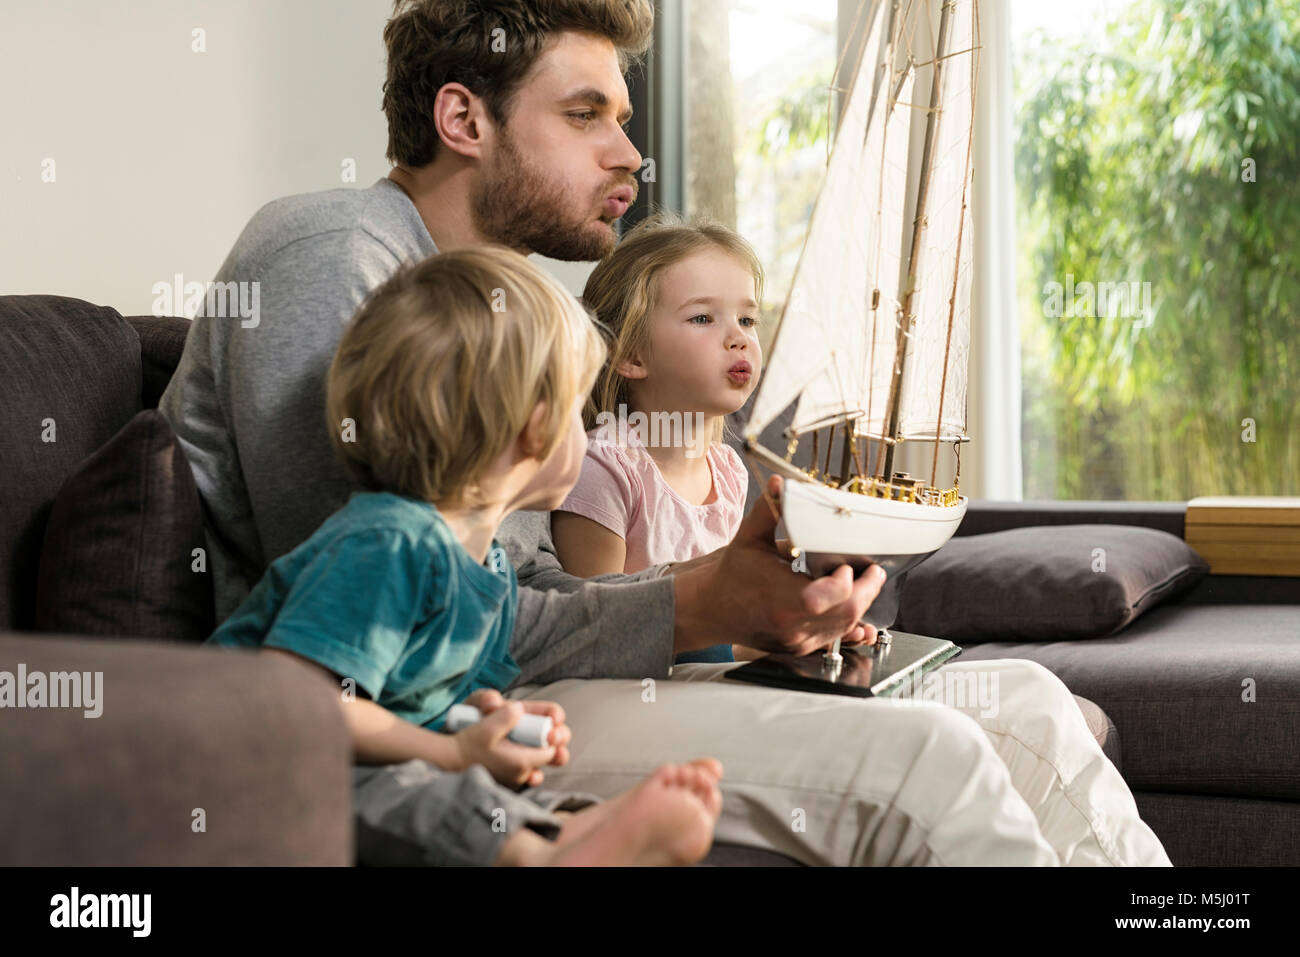 Father and children blowing into sails of toy model ship on couch at home Stock Photo